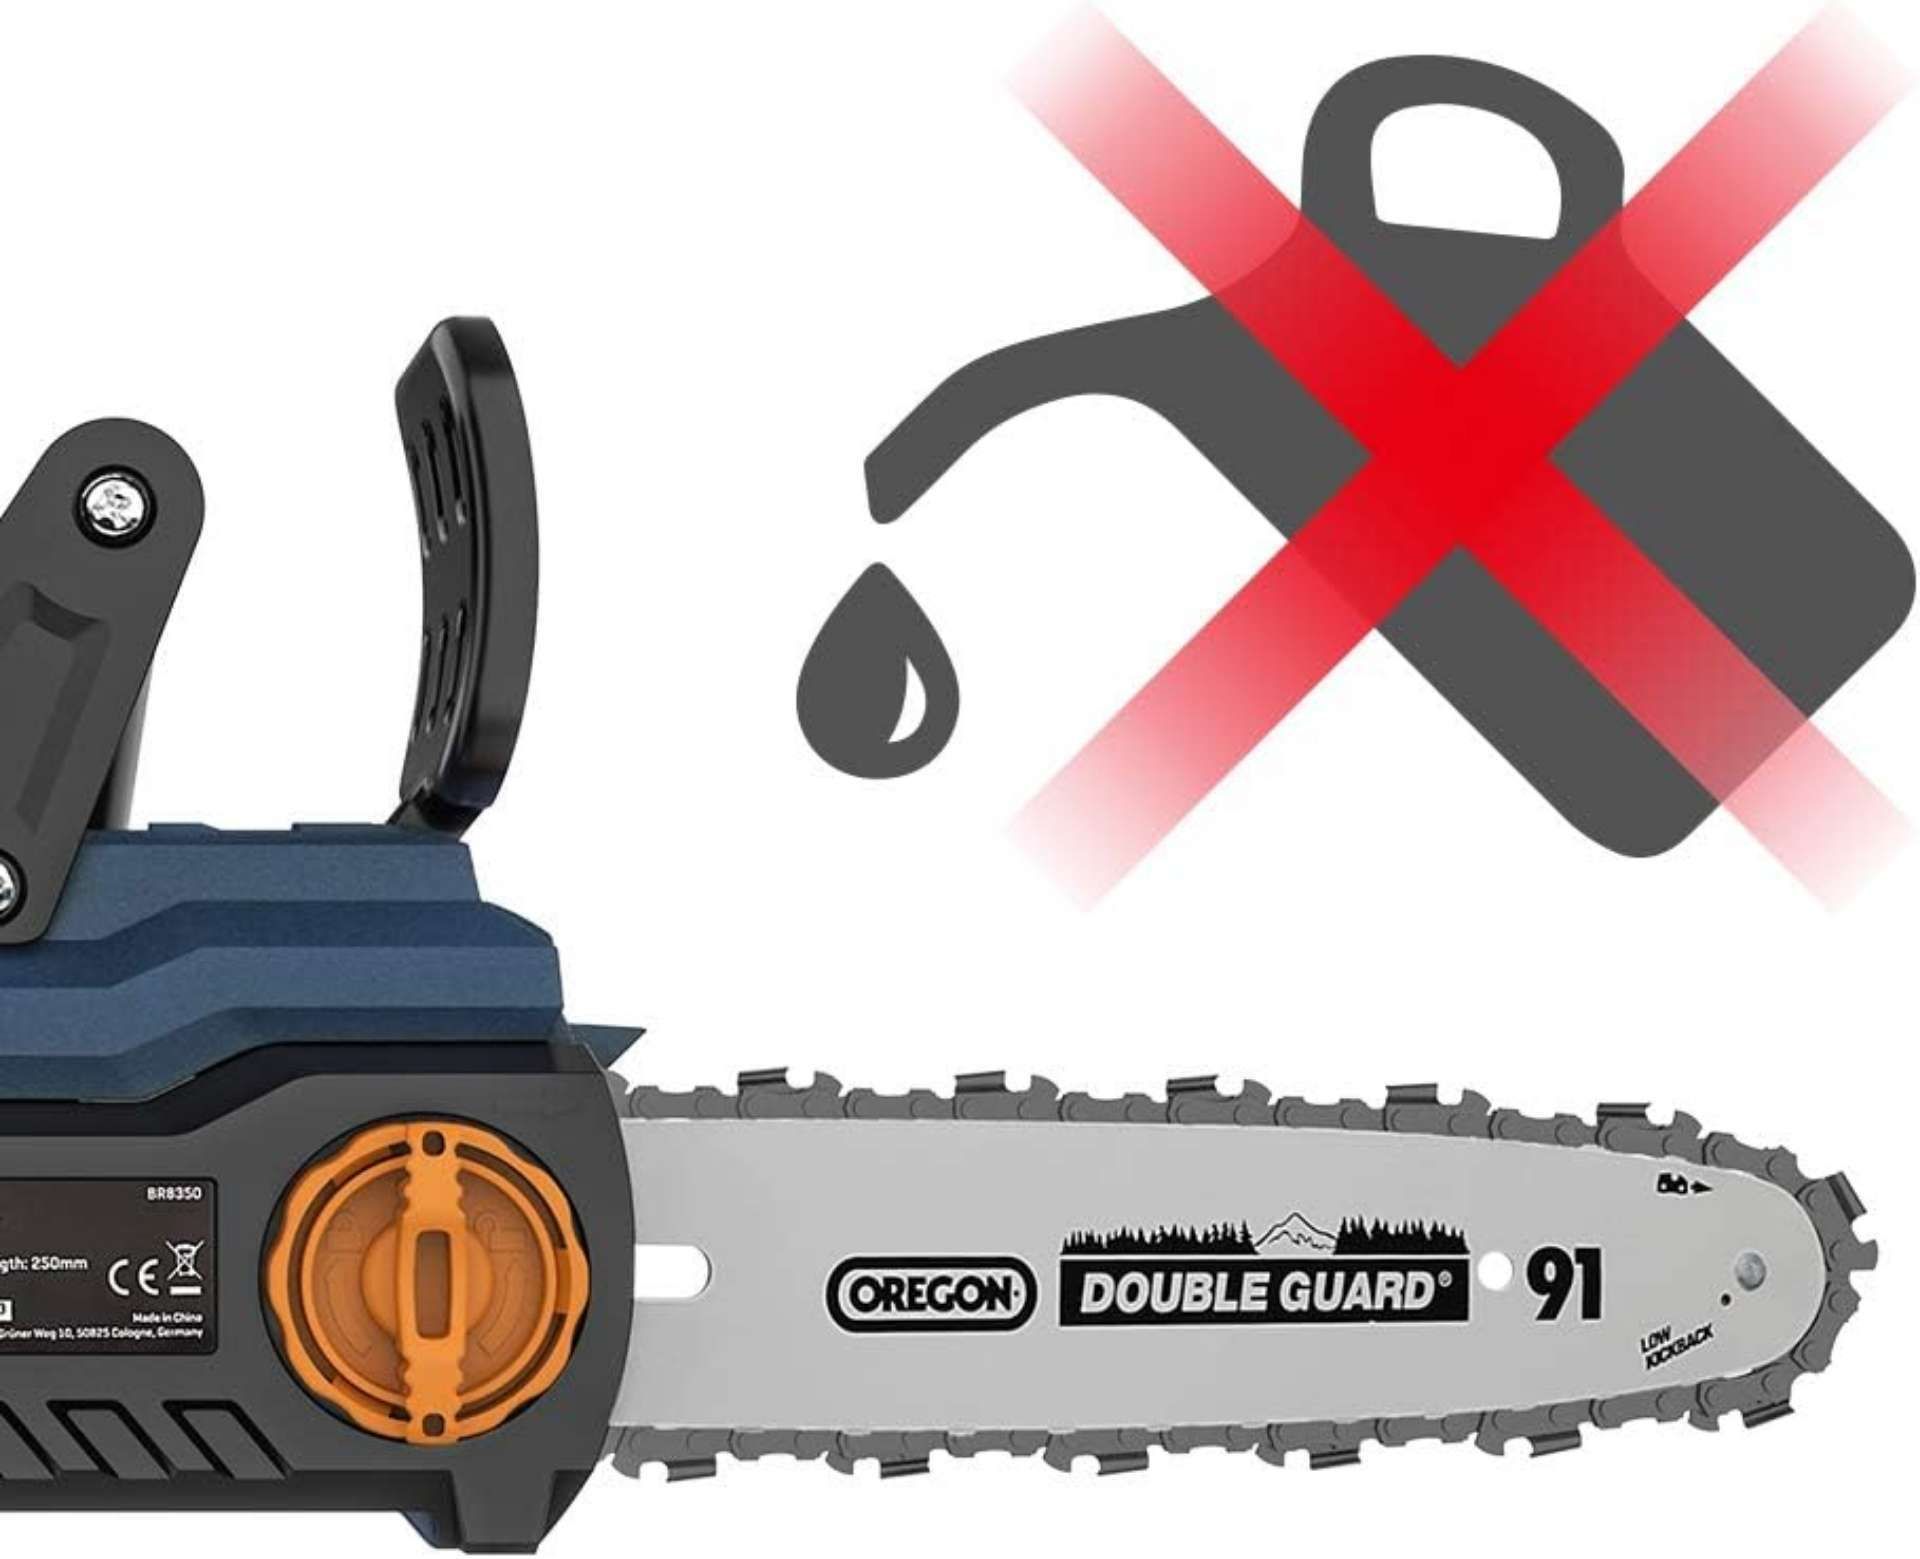 TRADE LOT 5 X NEW & BOXED BLUE RIDGE 25CM 18V Chainsaw with 4.0 Ah Li-ion Battery. RRP £119 EACH. - Image 2 of 4